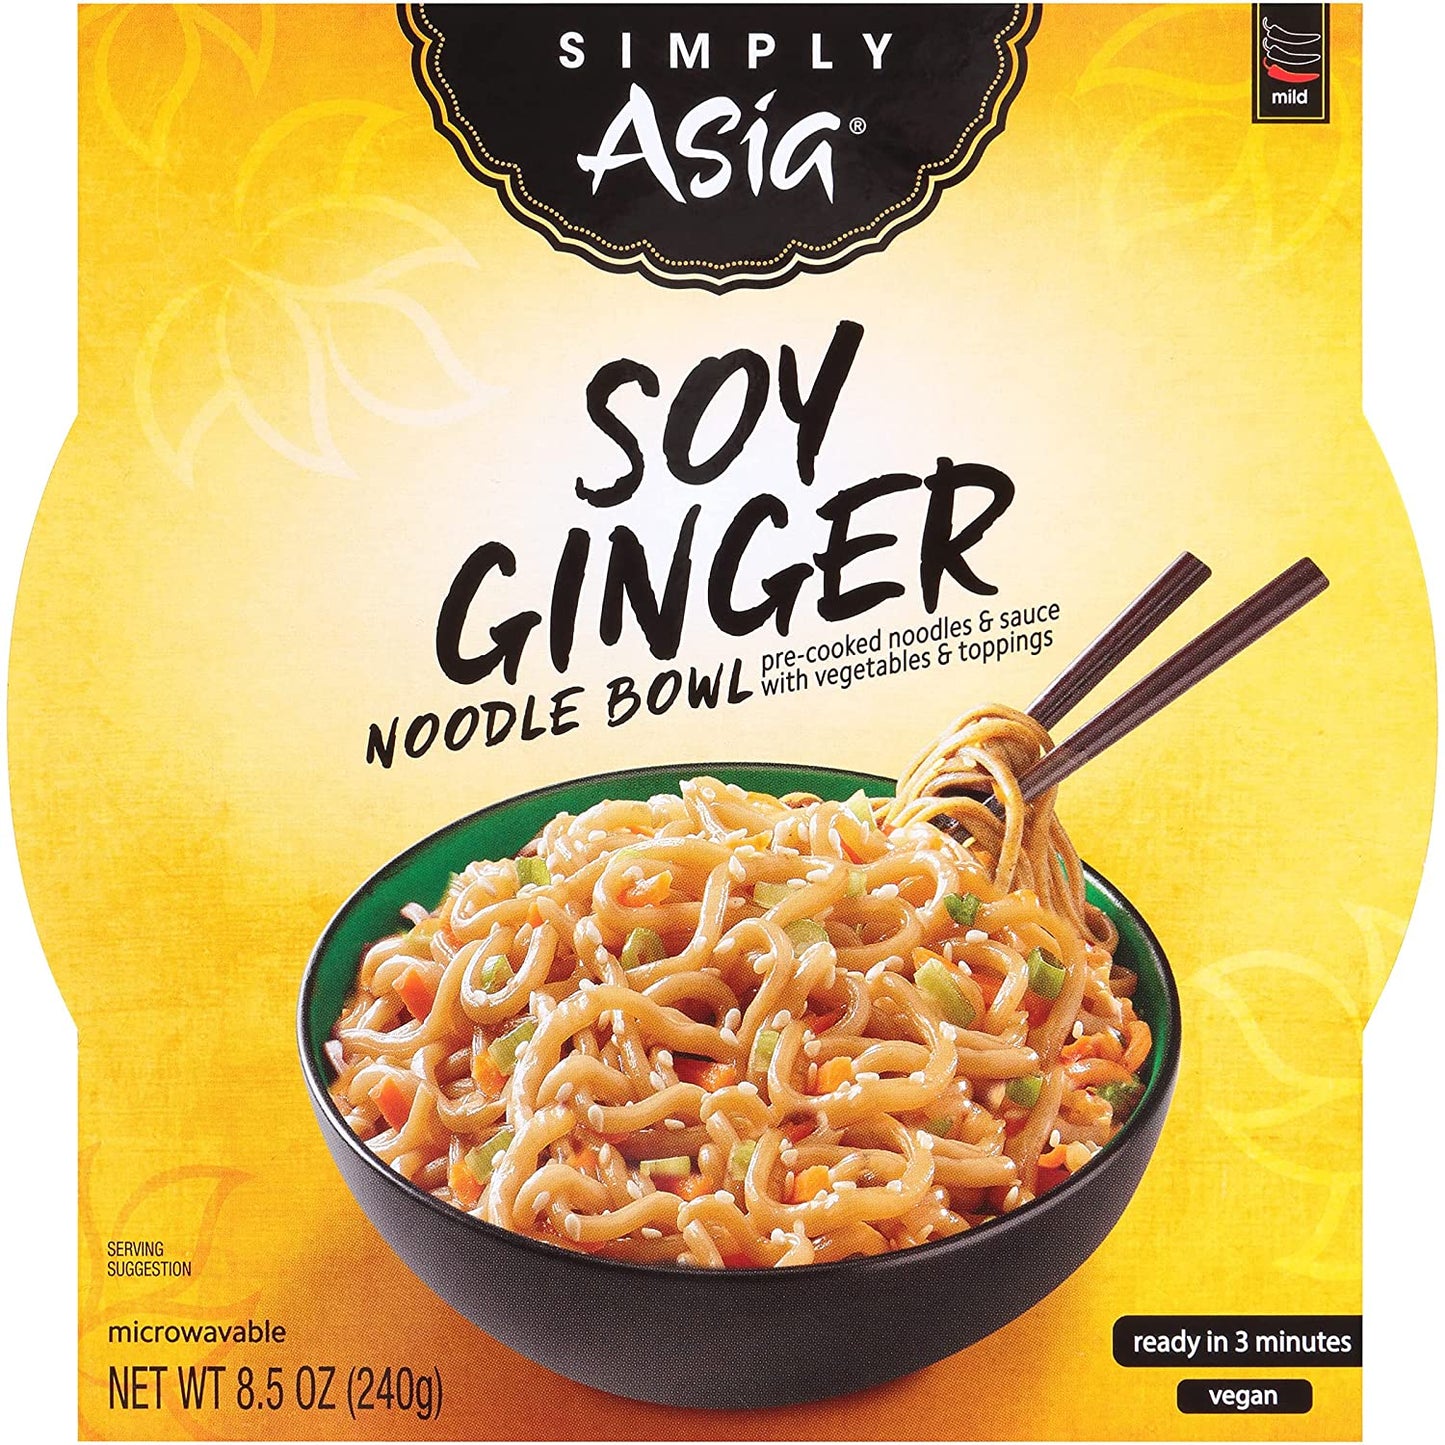 Simply Asia Soy Ginger Noodle Bowl, 8.5 oz (Pack of 6)